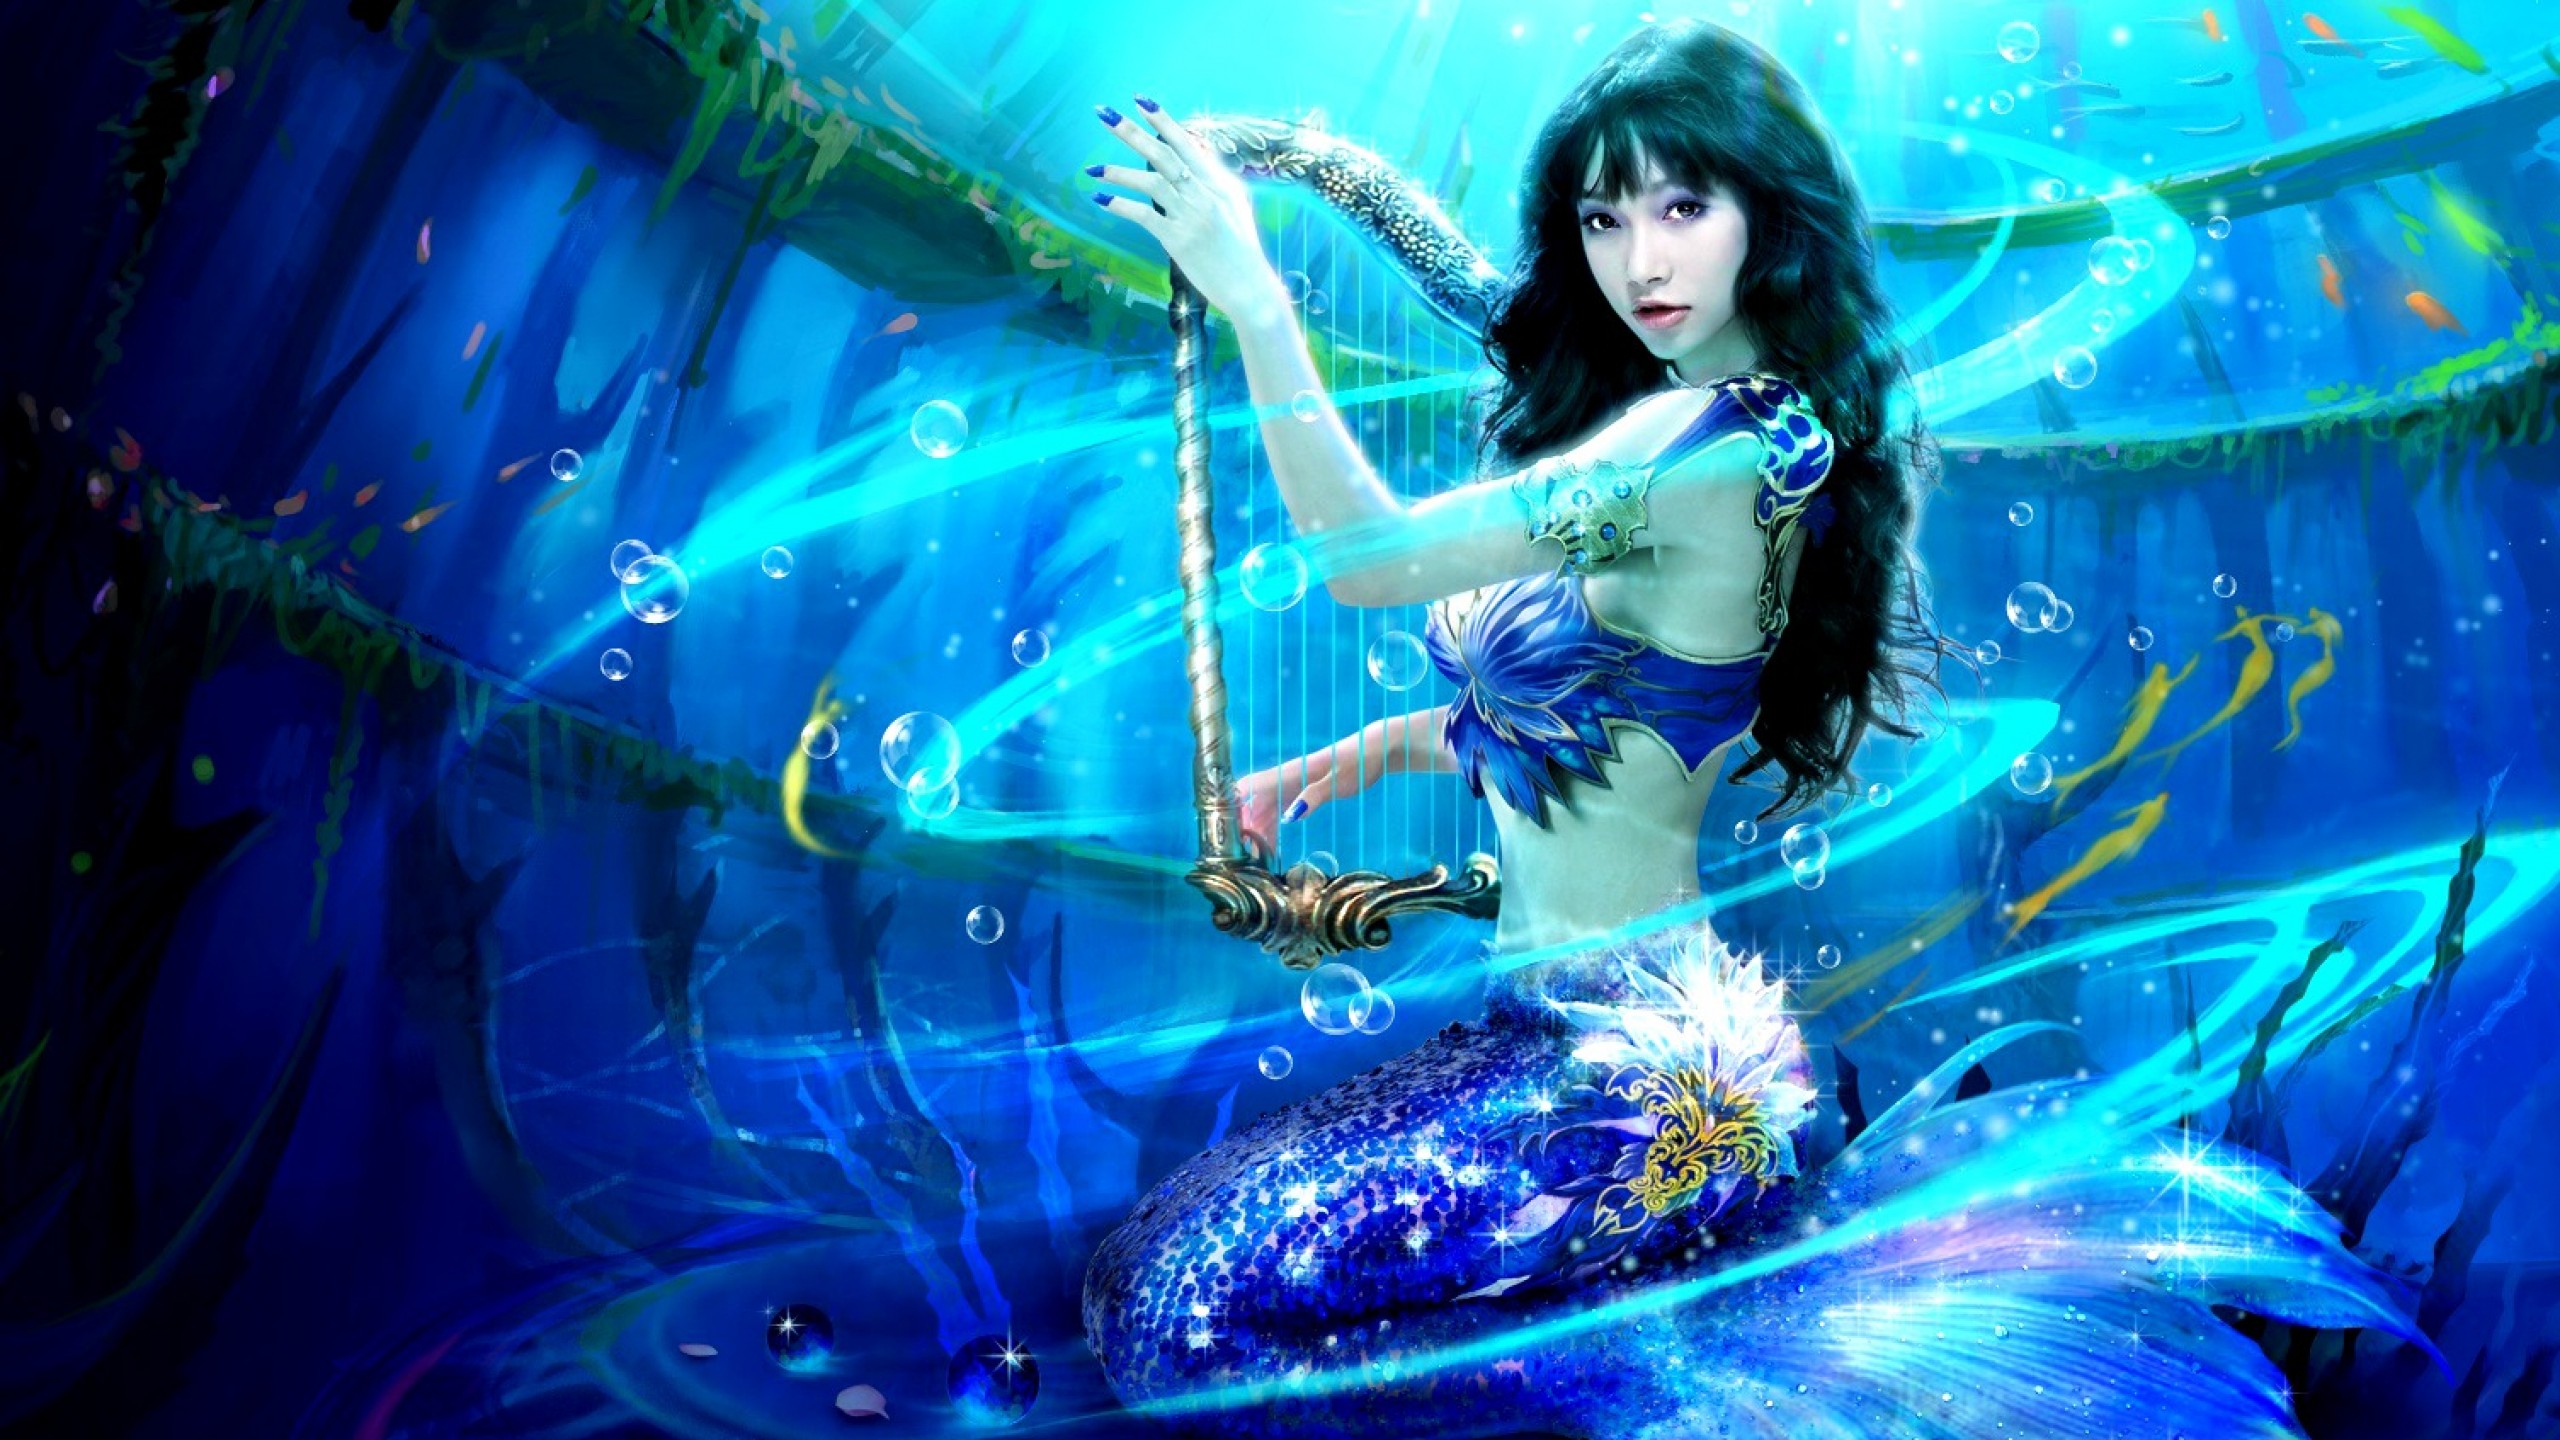 Free download Mermaid Wallpapers Wallpaper High Definition High Quality  [2560x1440] for your Desktop, Mobile & Tablet | Explore 77+ Mermaid  Wallpapers | Free Mermaid Wallpaper, Mermaid Melody Wallpaper, Mermaid  Wallpaper